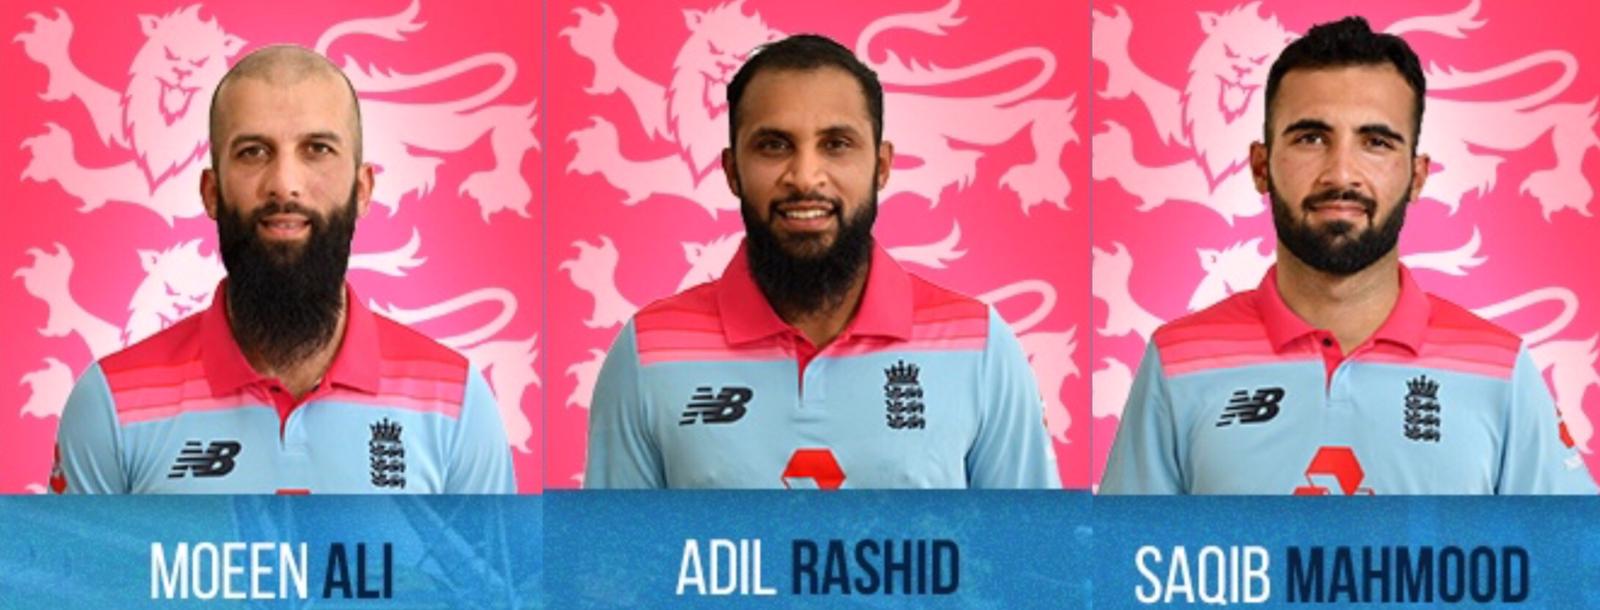 In a historic first, three Muslim players included in England cricket team